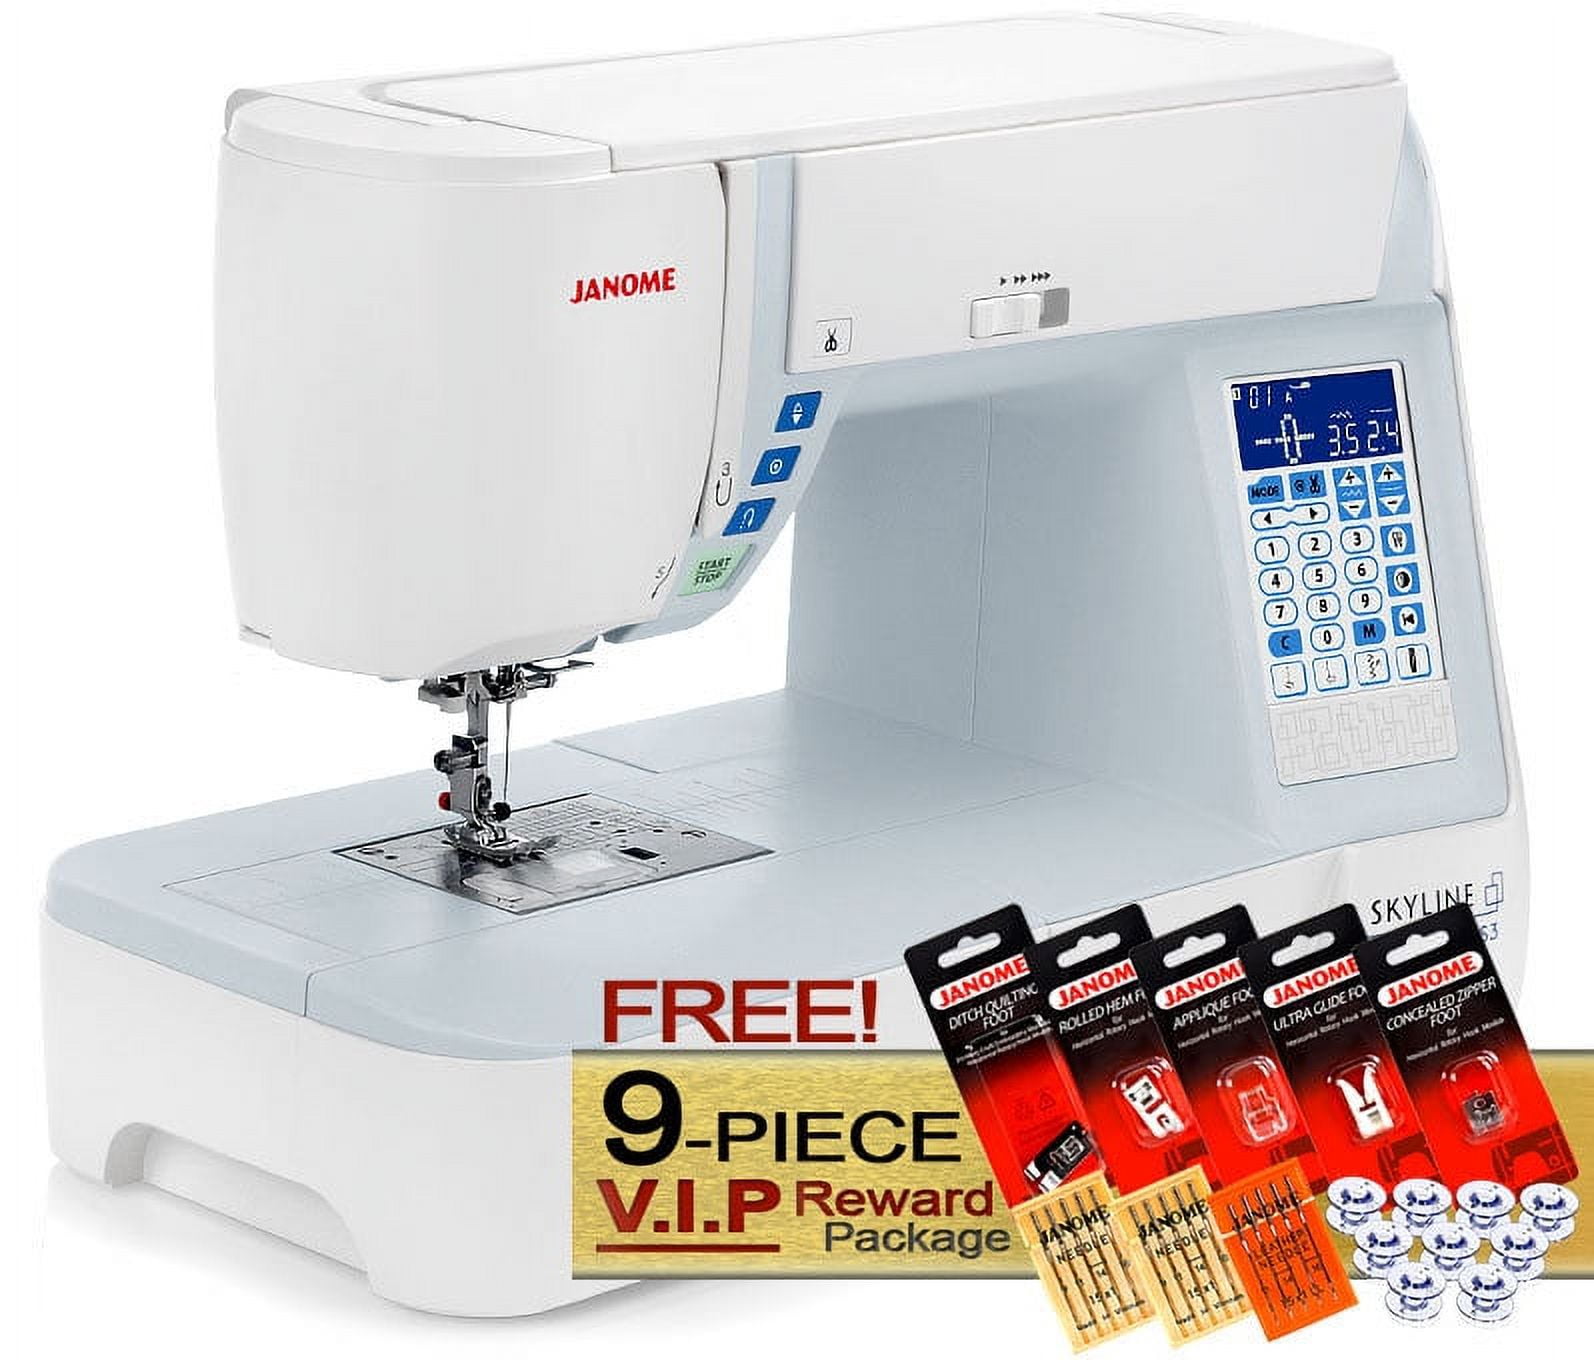 ERP Software Provides Seamless Transition for Janome Sewing